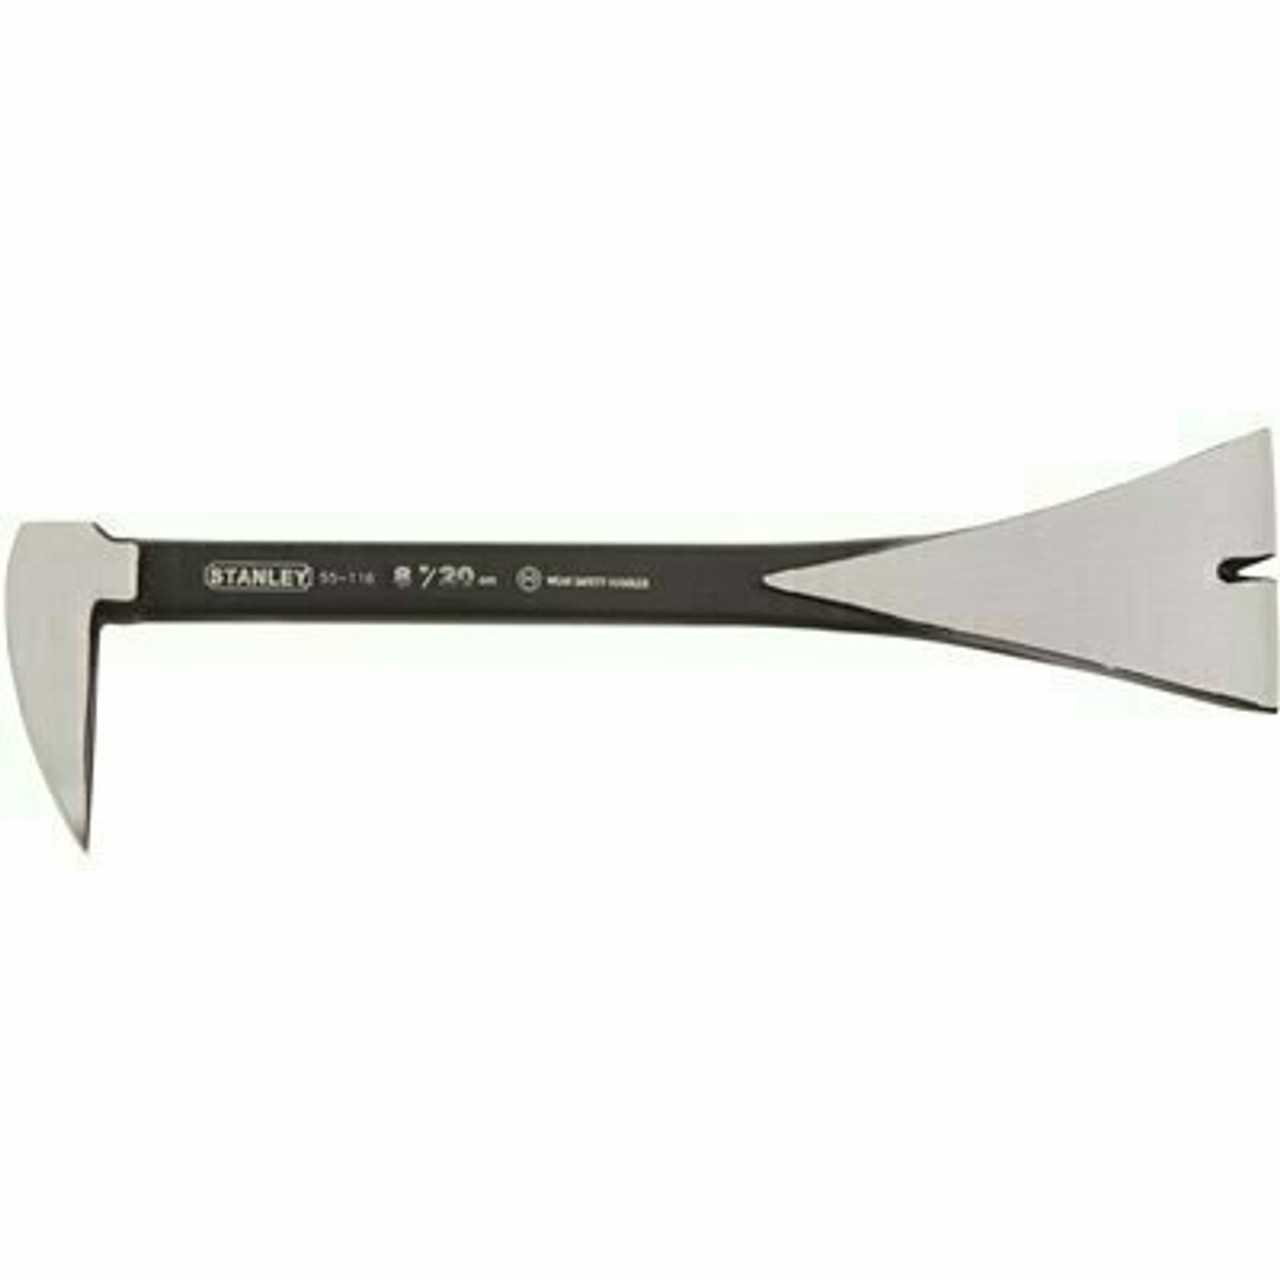 Stanley 8 In. Precision Molding Bar